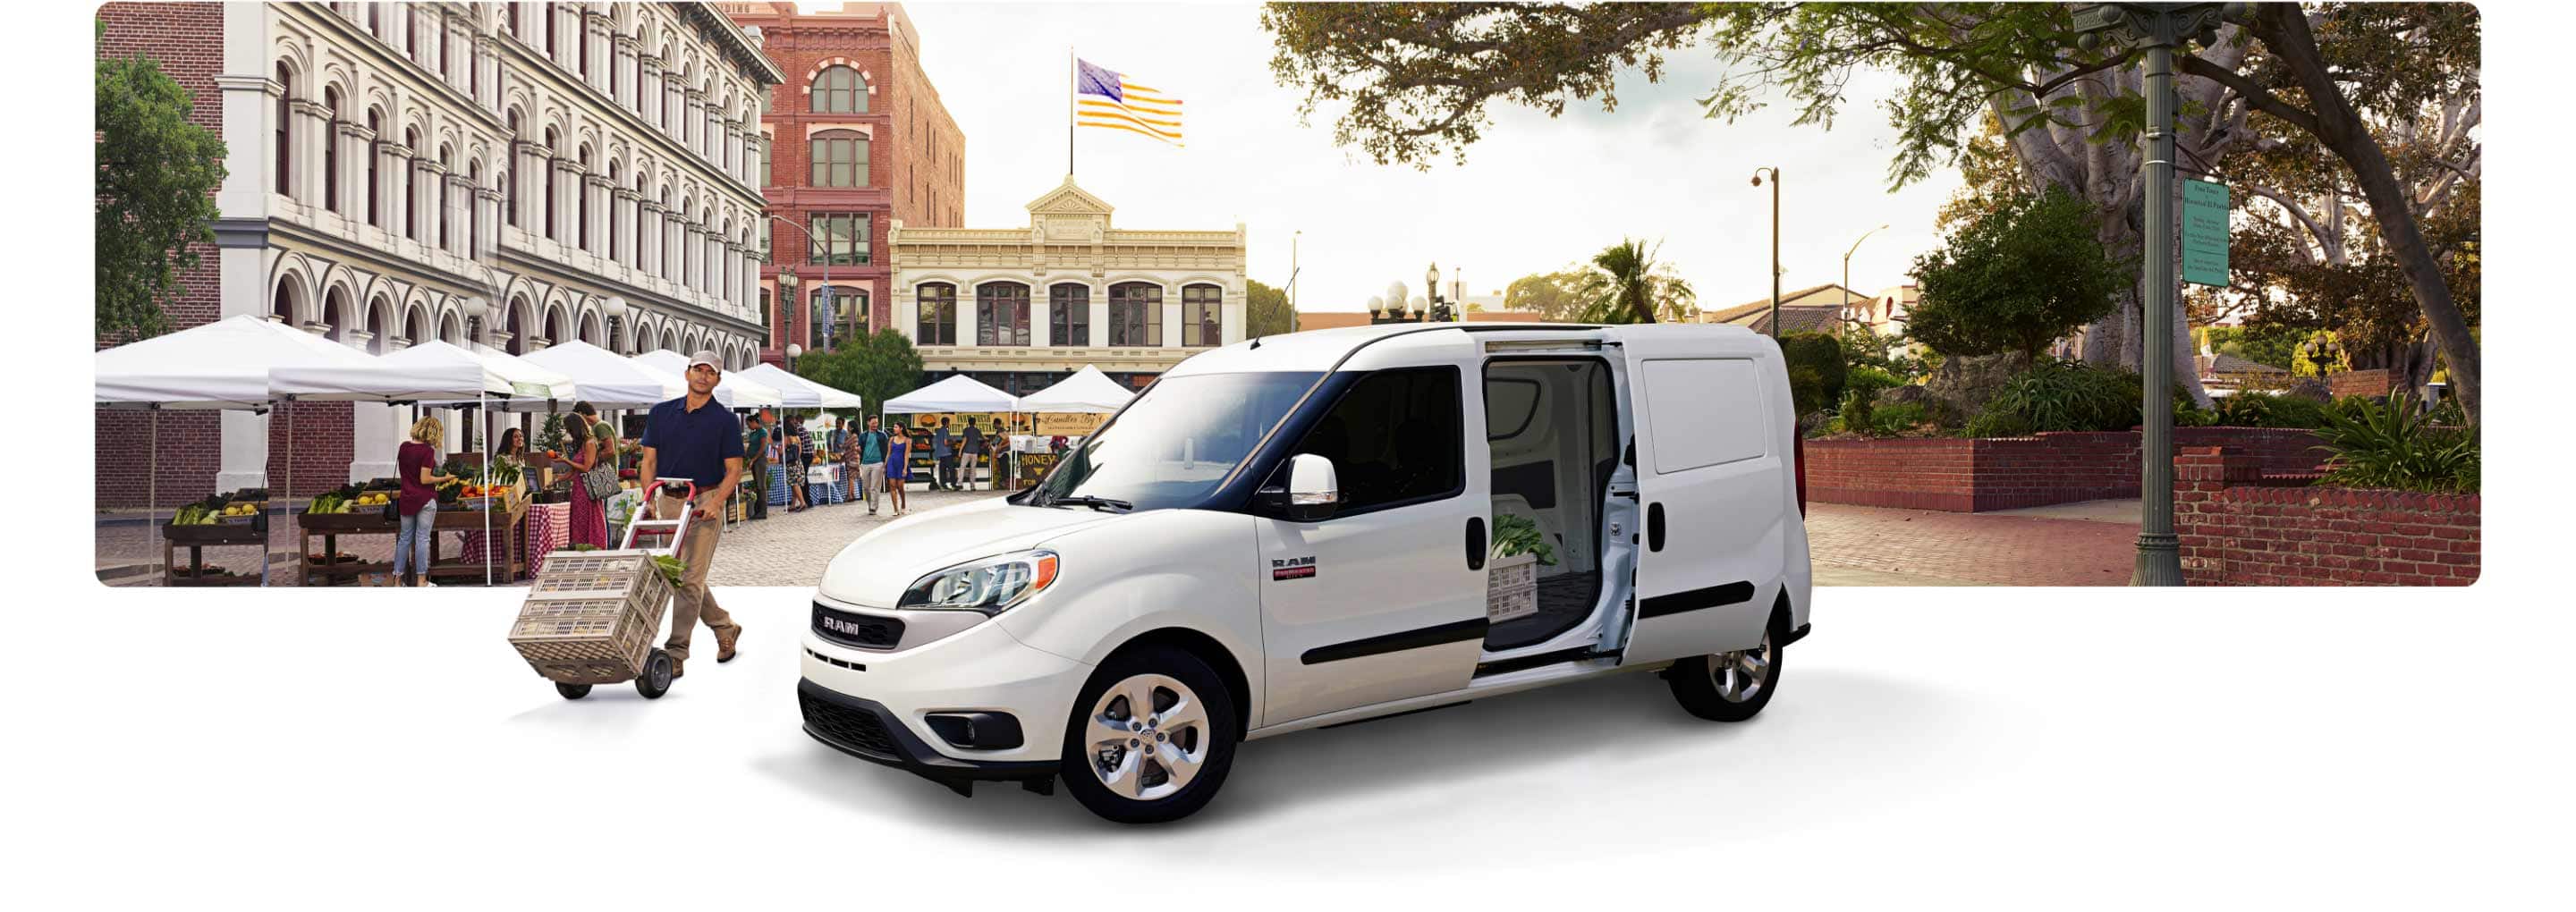 The 2021 Ram ProMaster City Cargo Van parked at an outdoor market with its driver-side rear door open.